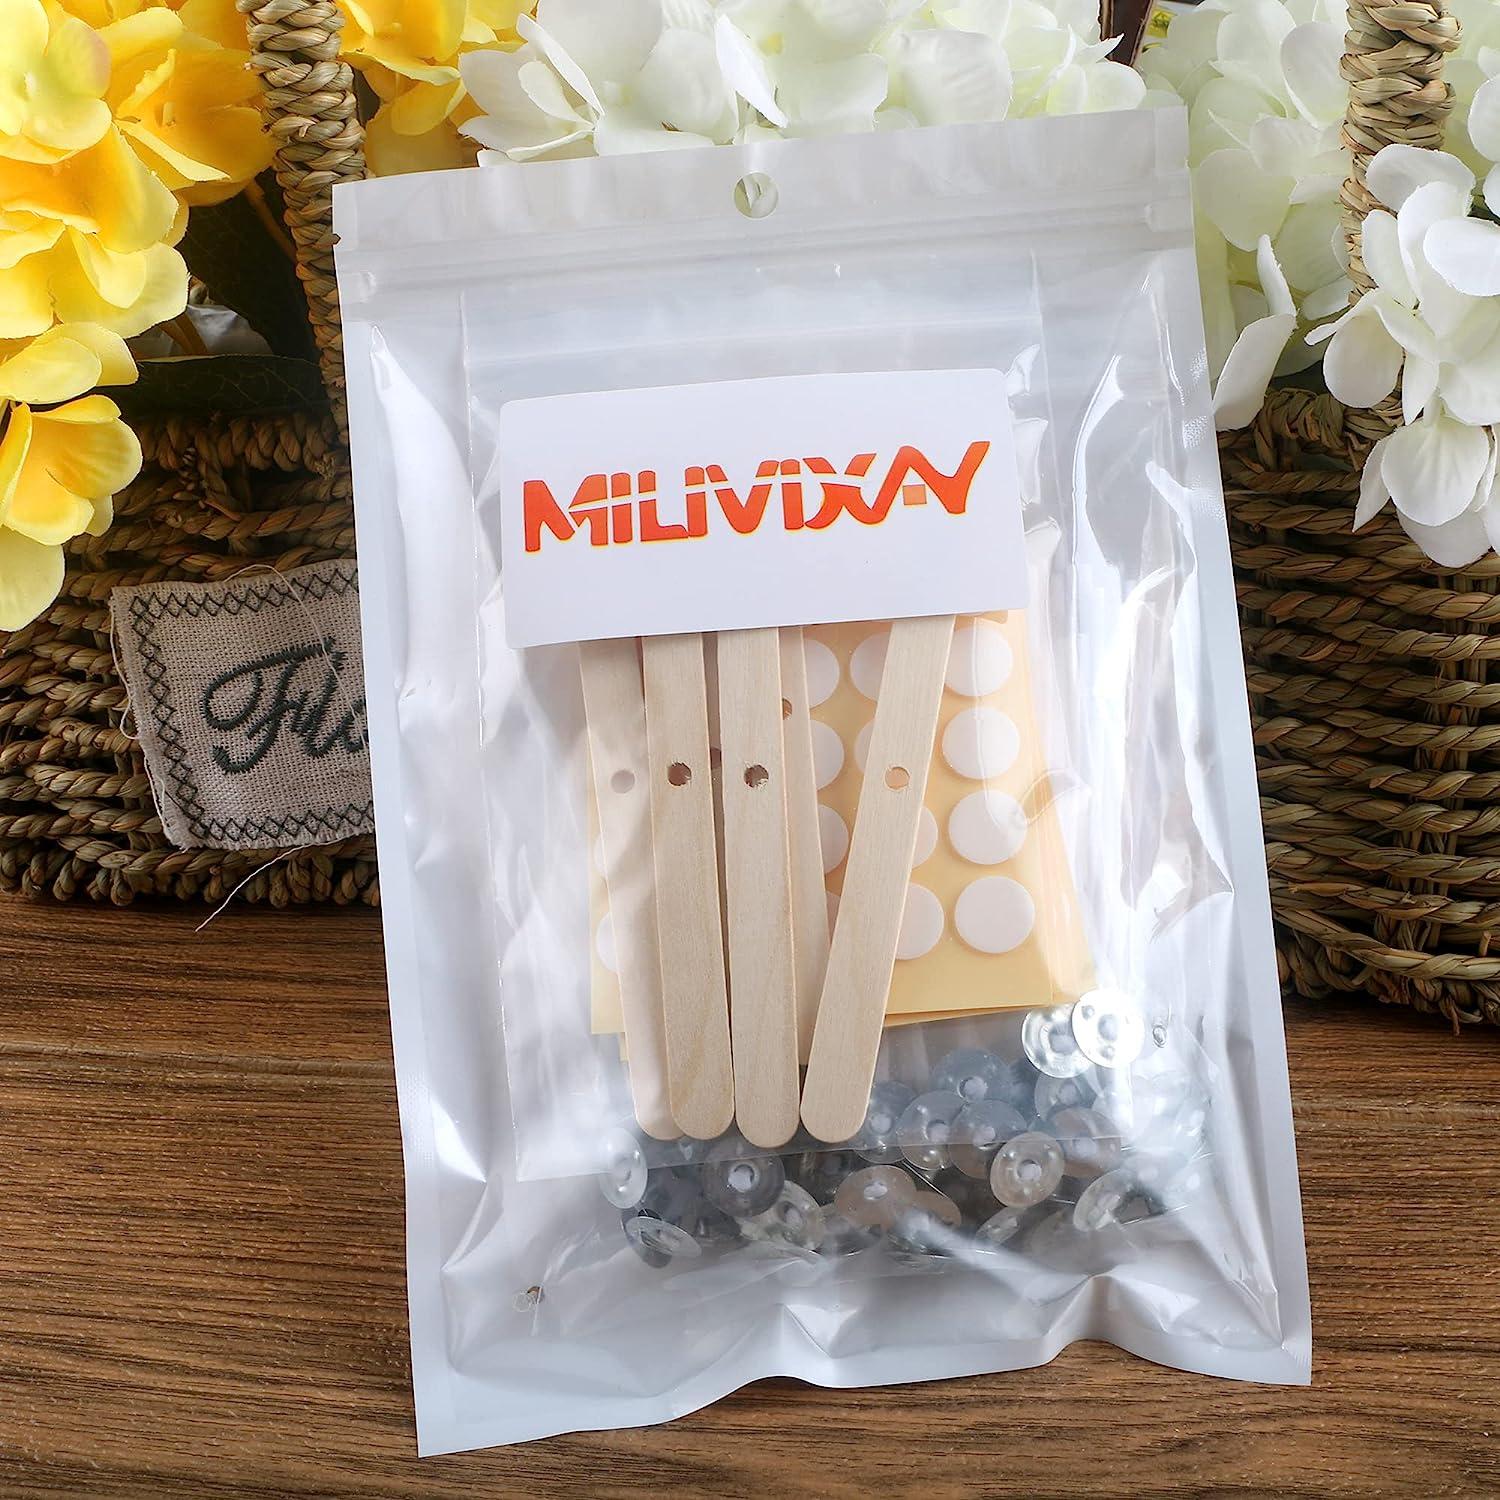 MILIVIXAY 3.5 inch Candle Wick Bundle: 100PCS Candle Wicks, 100PCS Candle  Wick Stickers and 6PCS Wooden Candle Wick Holders - Wicks Coated with